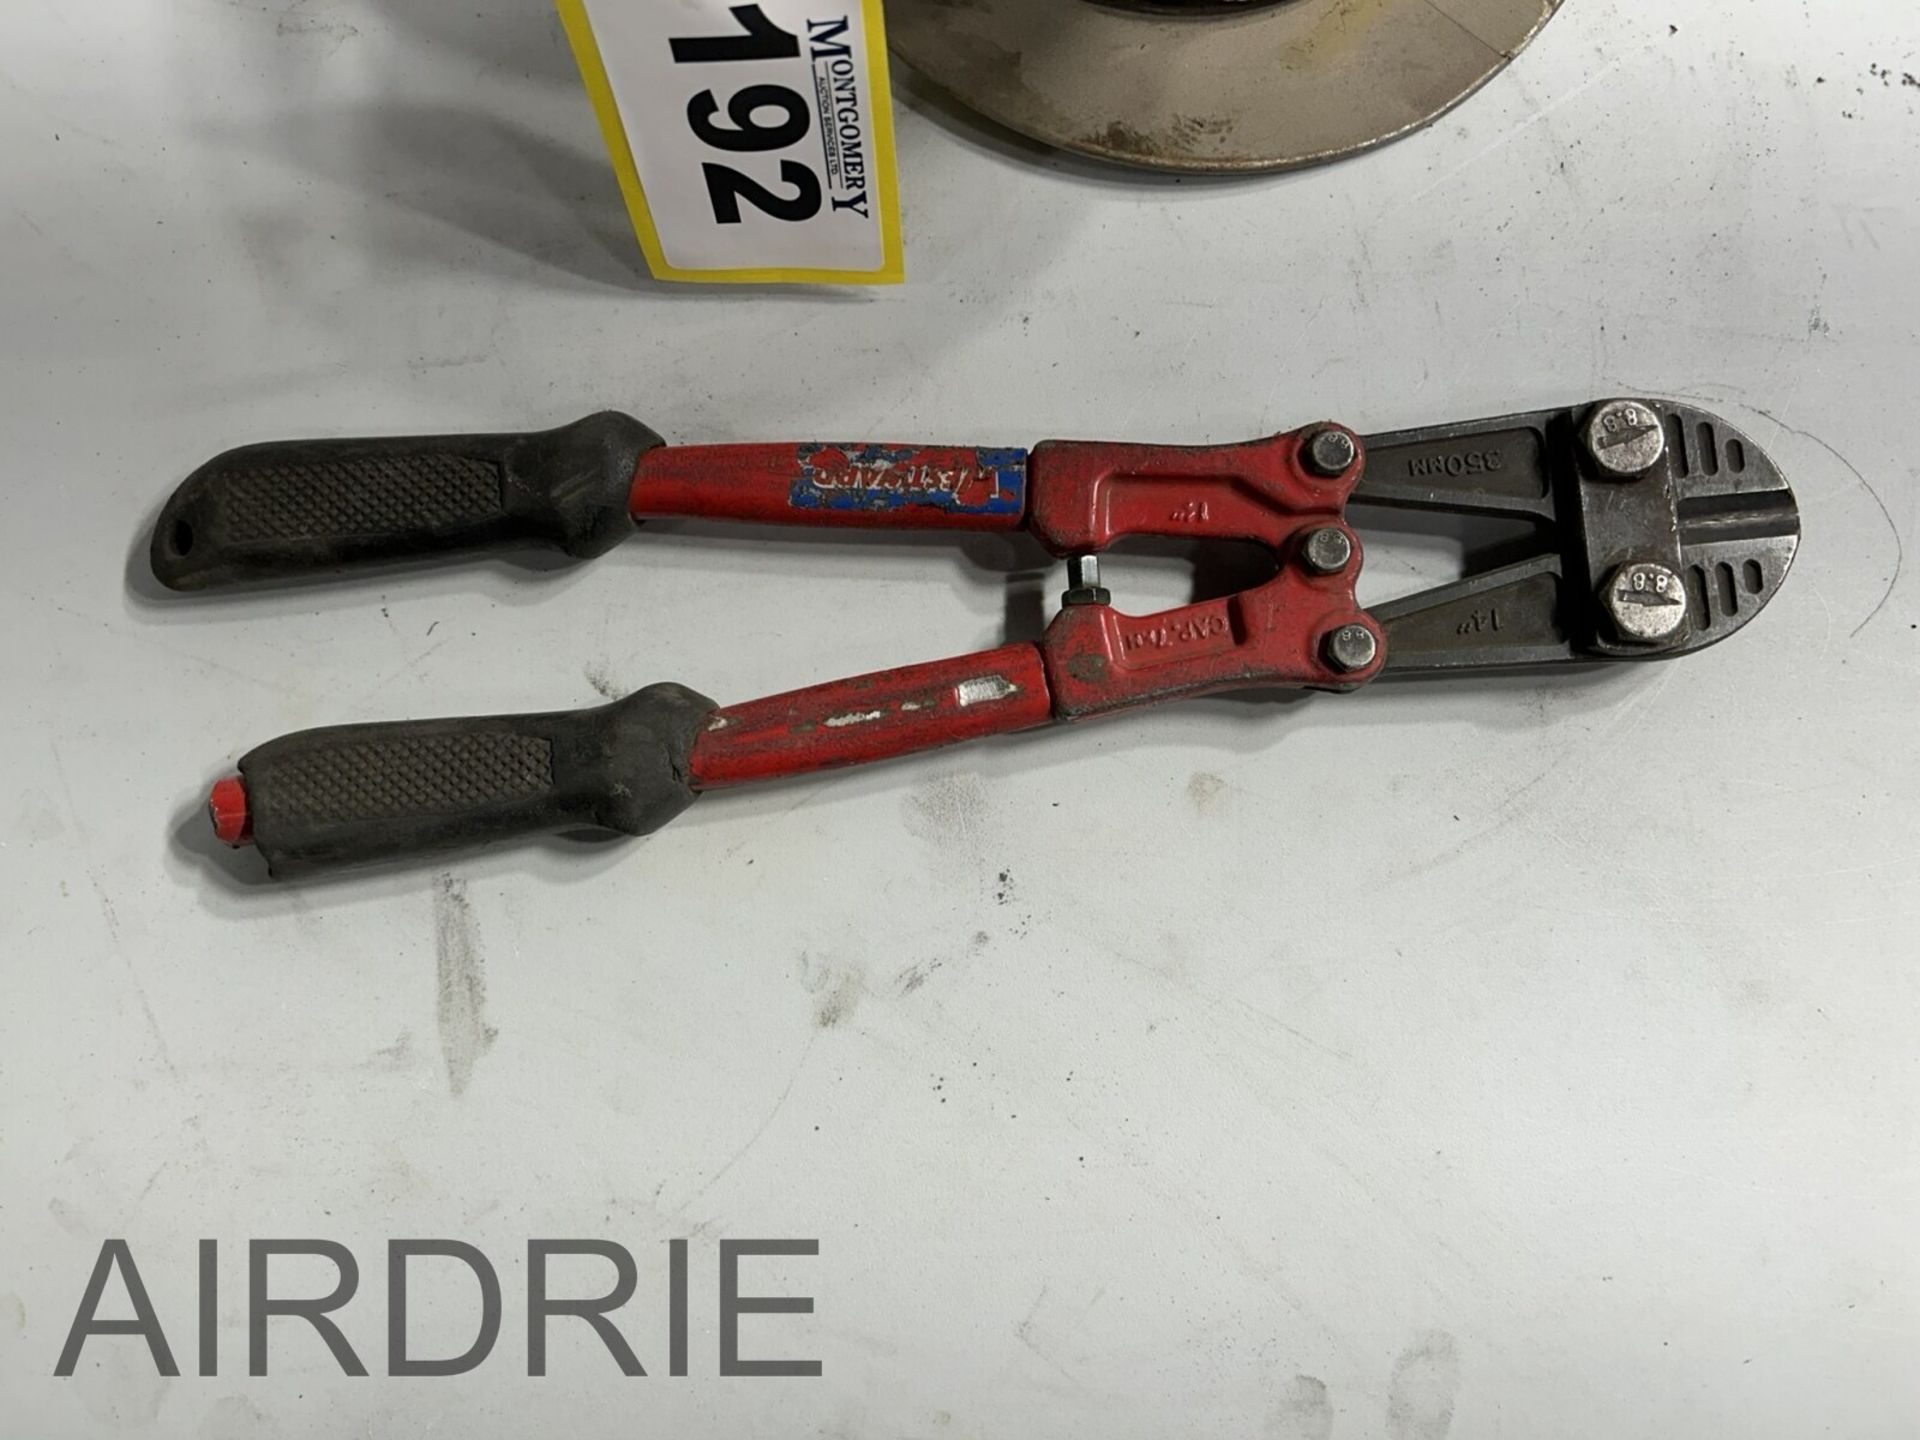 *OFFSITE* ROLL OF AIRCRAFT CABLE AND WESTWARD 14" BOLT CUTTERS - Image 2 of 3